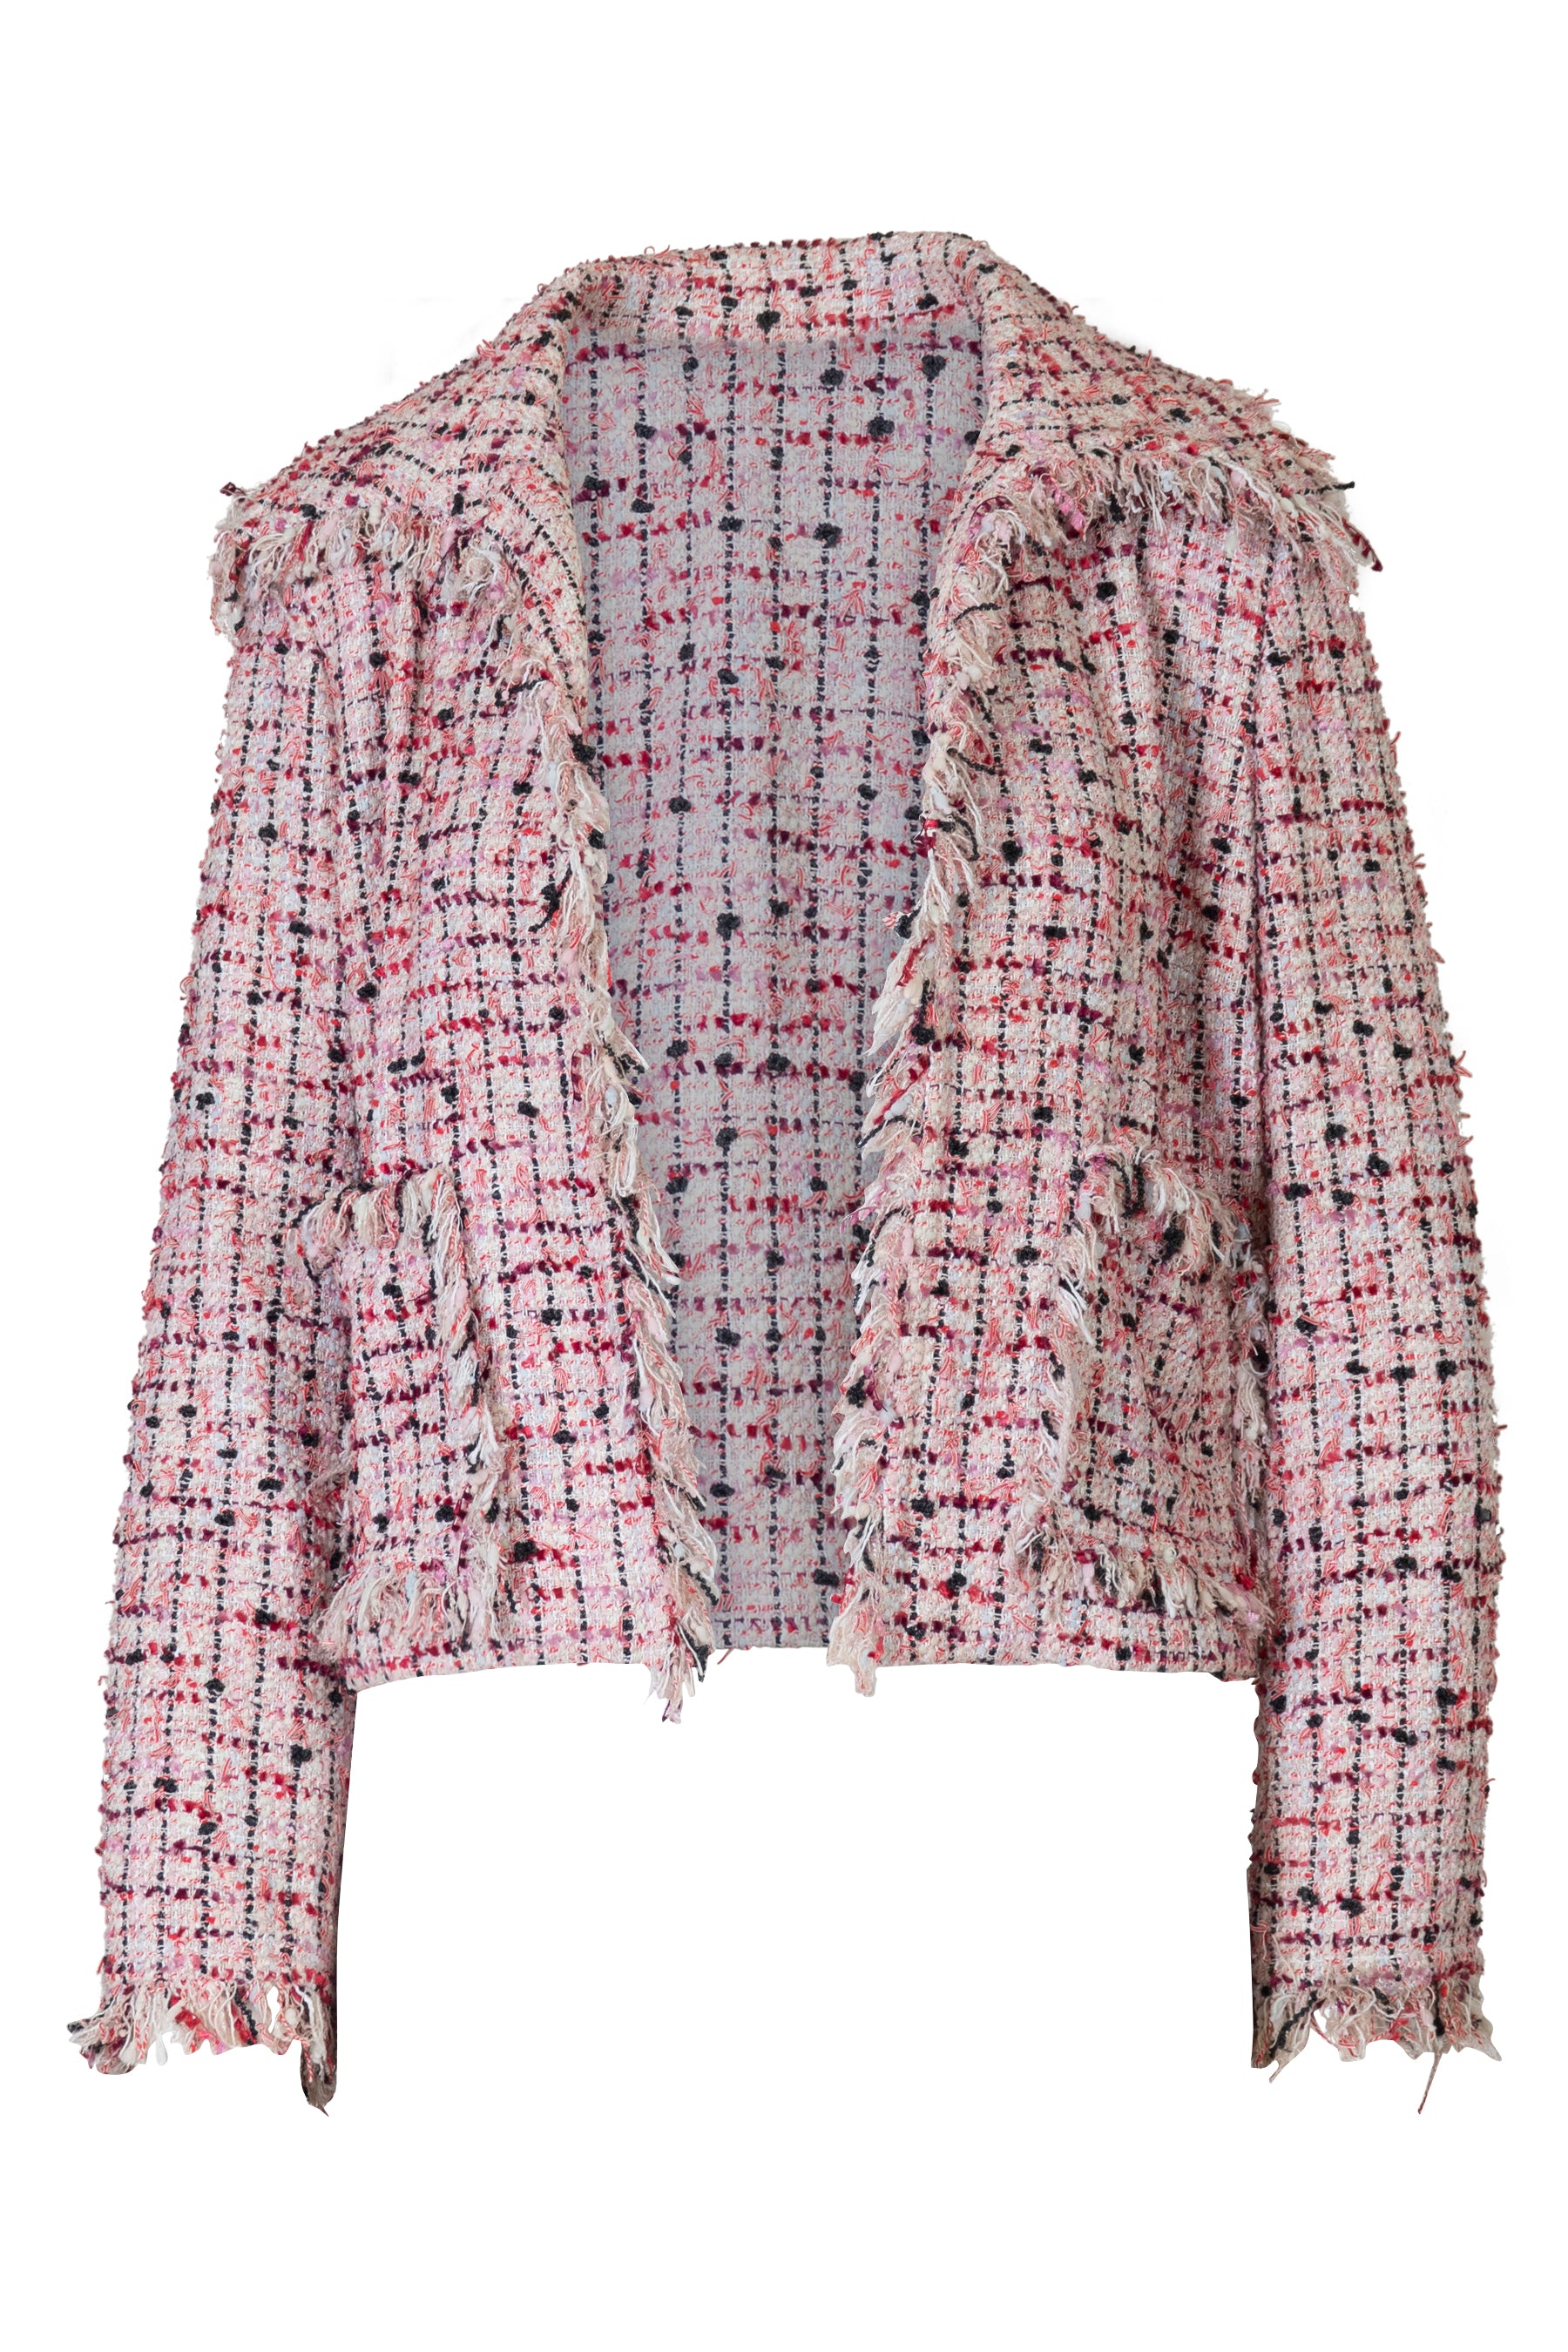 Maison Common 4-Pocket Floral Embroidered Tweed Jacket